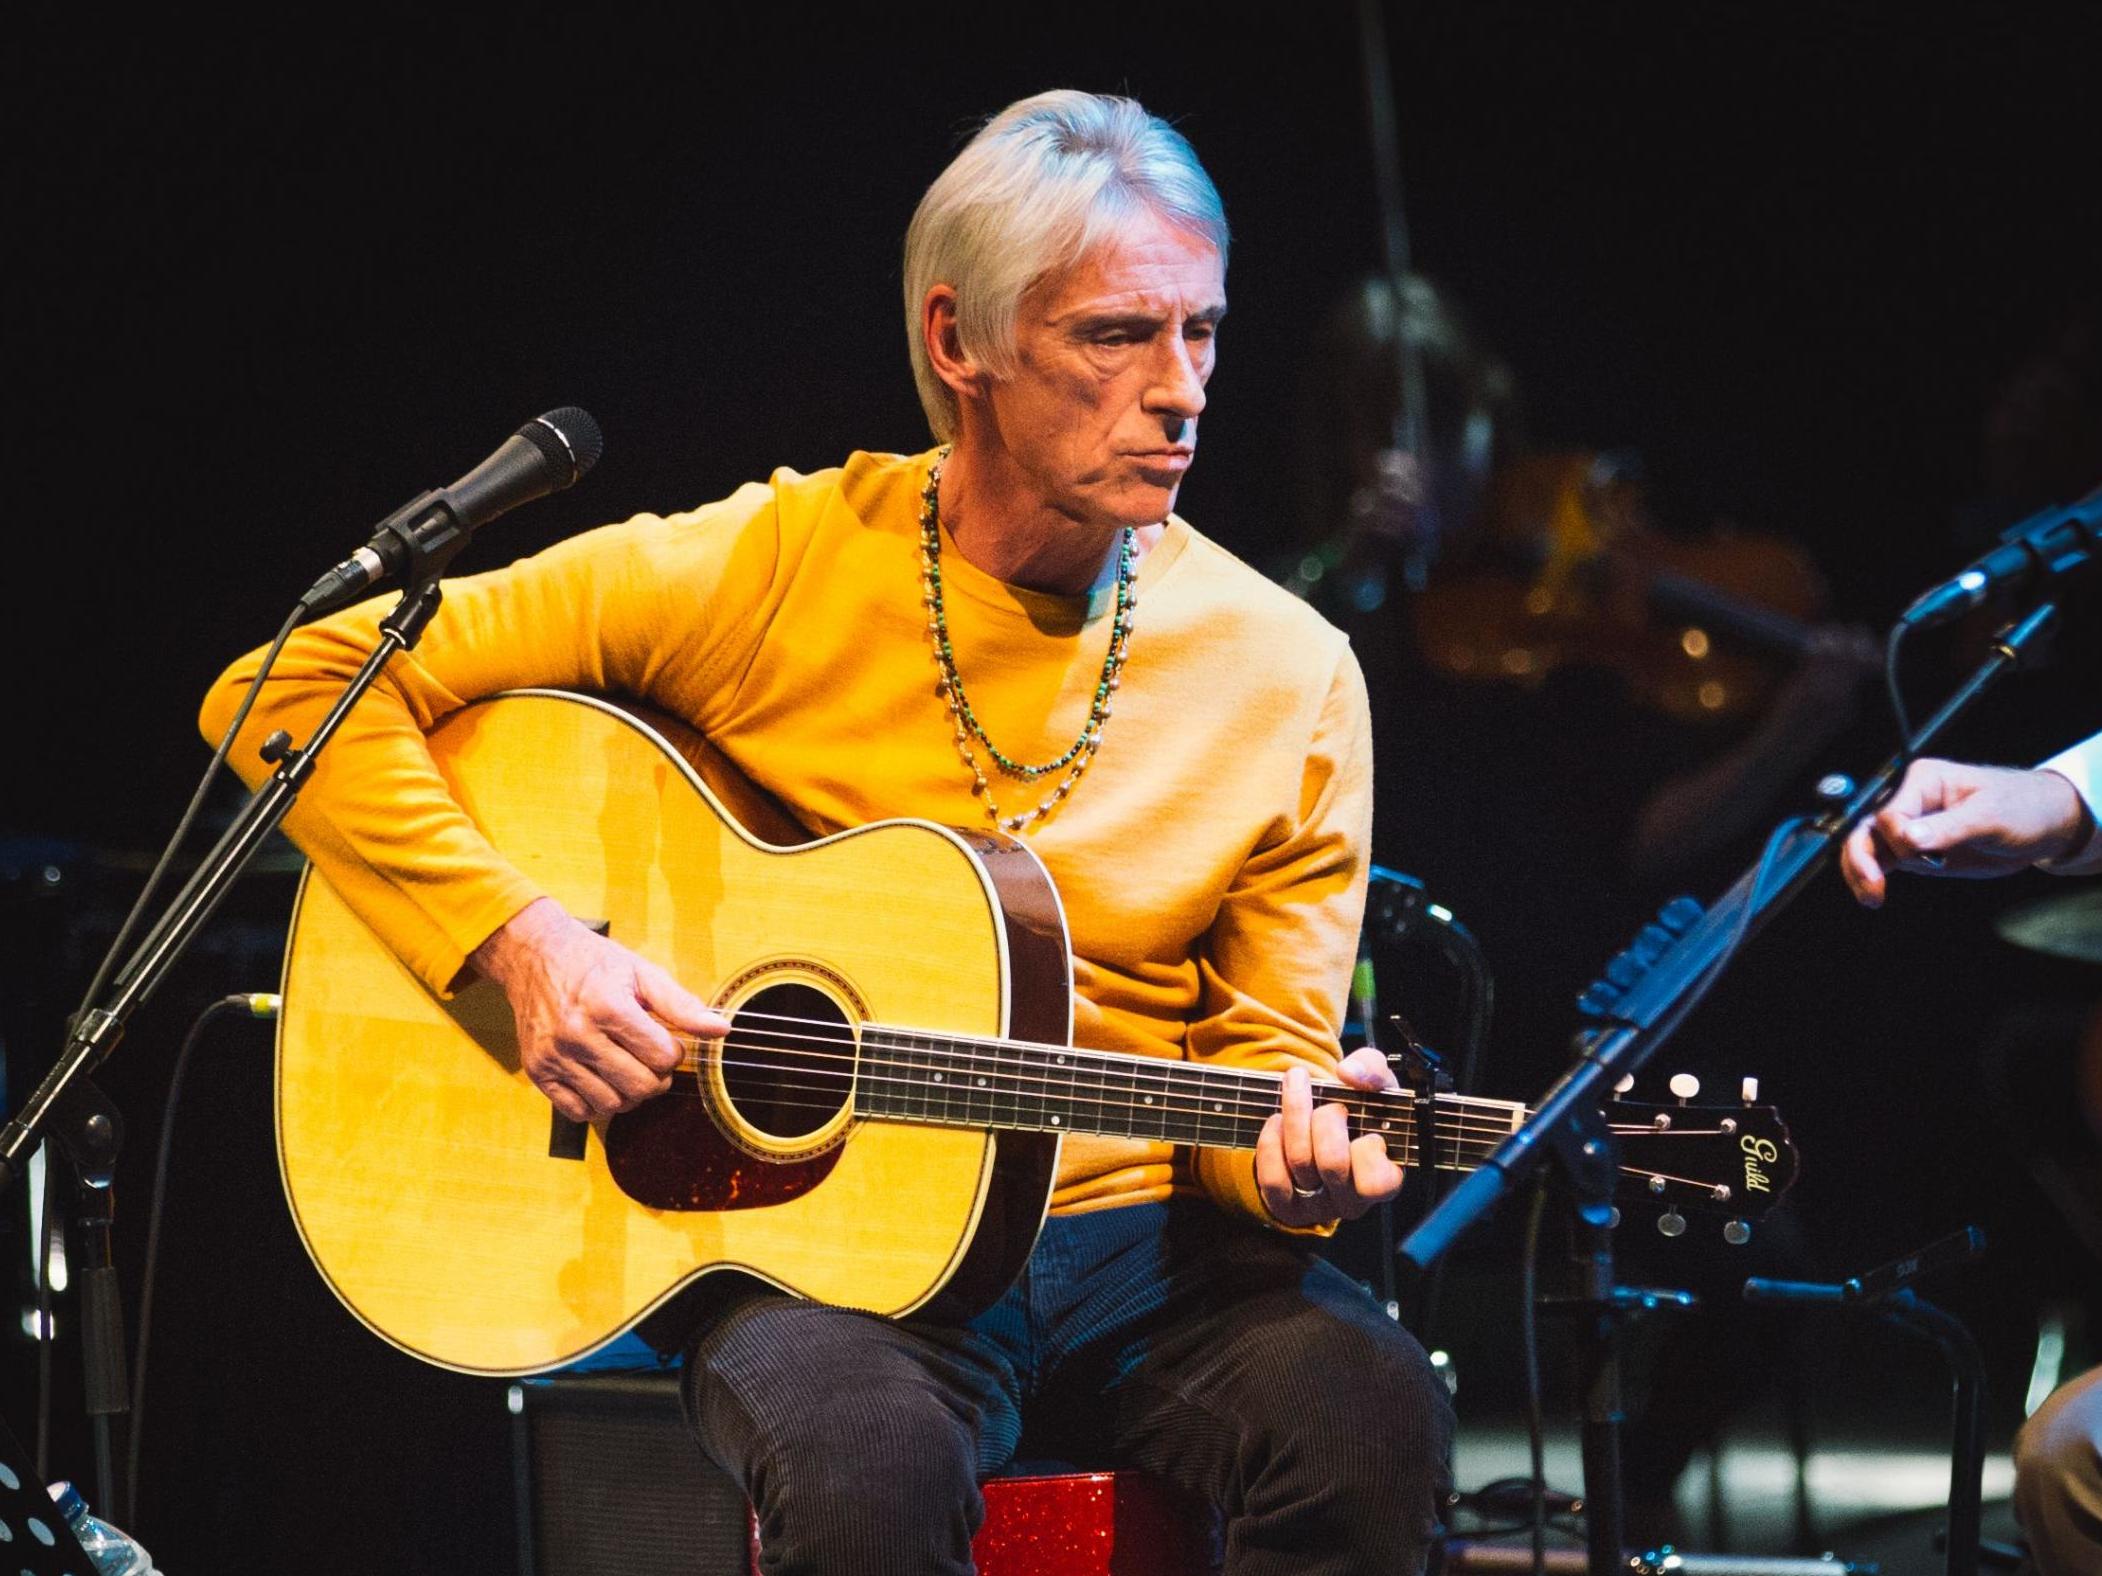 Paul Weller performs at the Royal Festival Hall